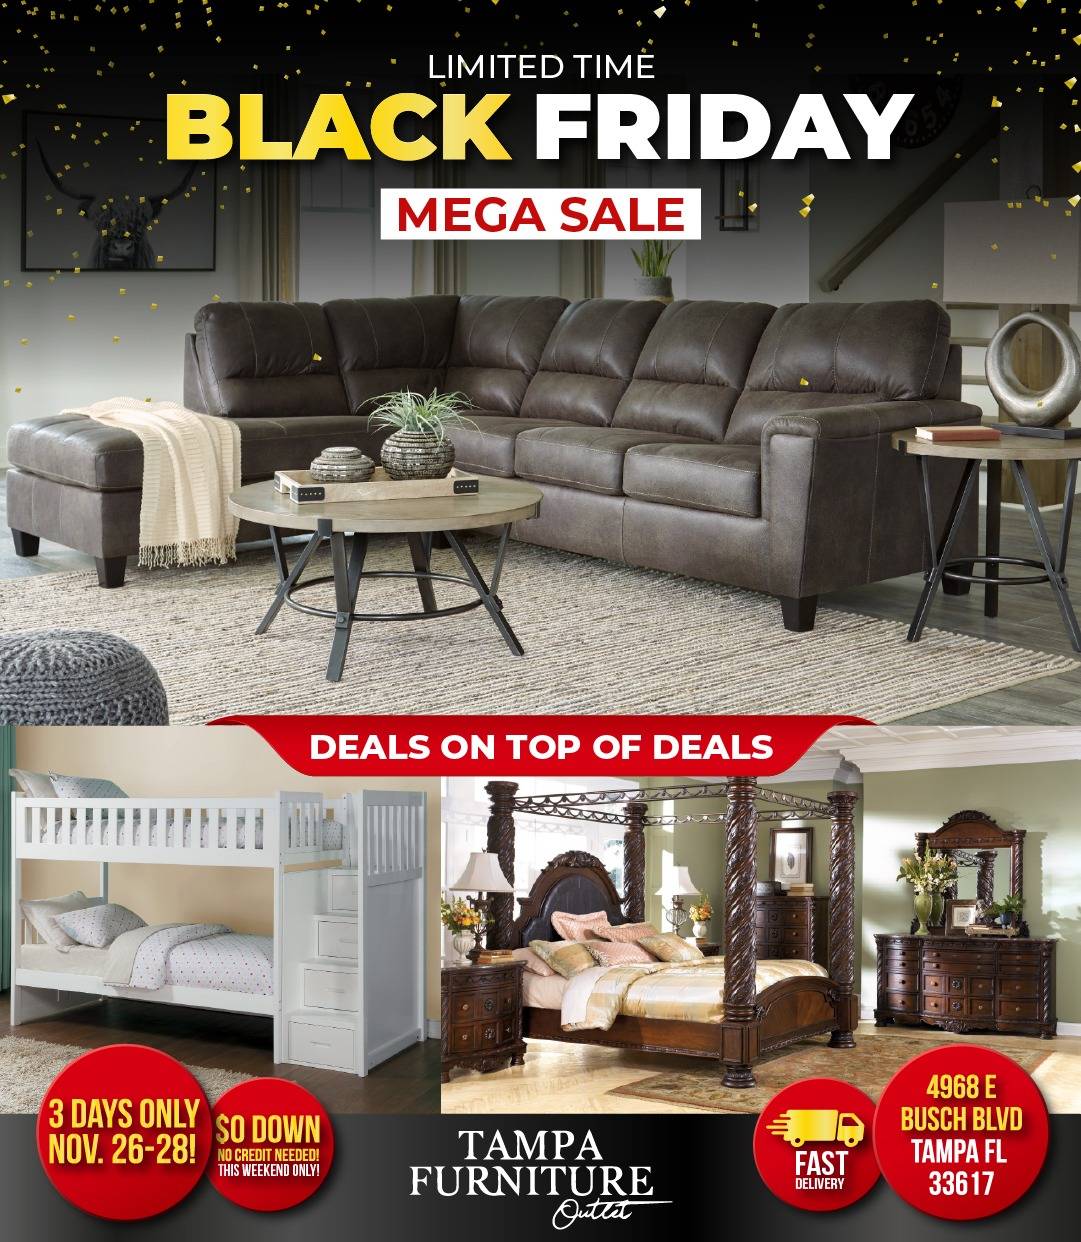 Toa Baja PR Discount Furniture Outlet Store